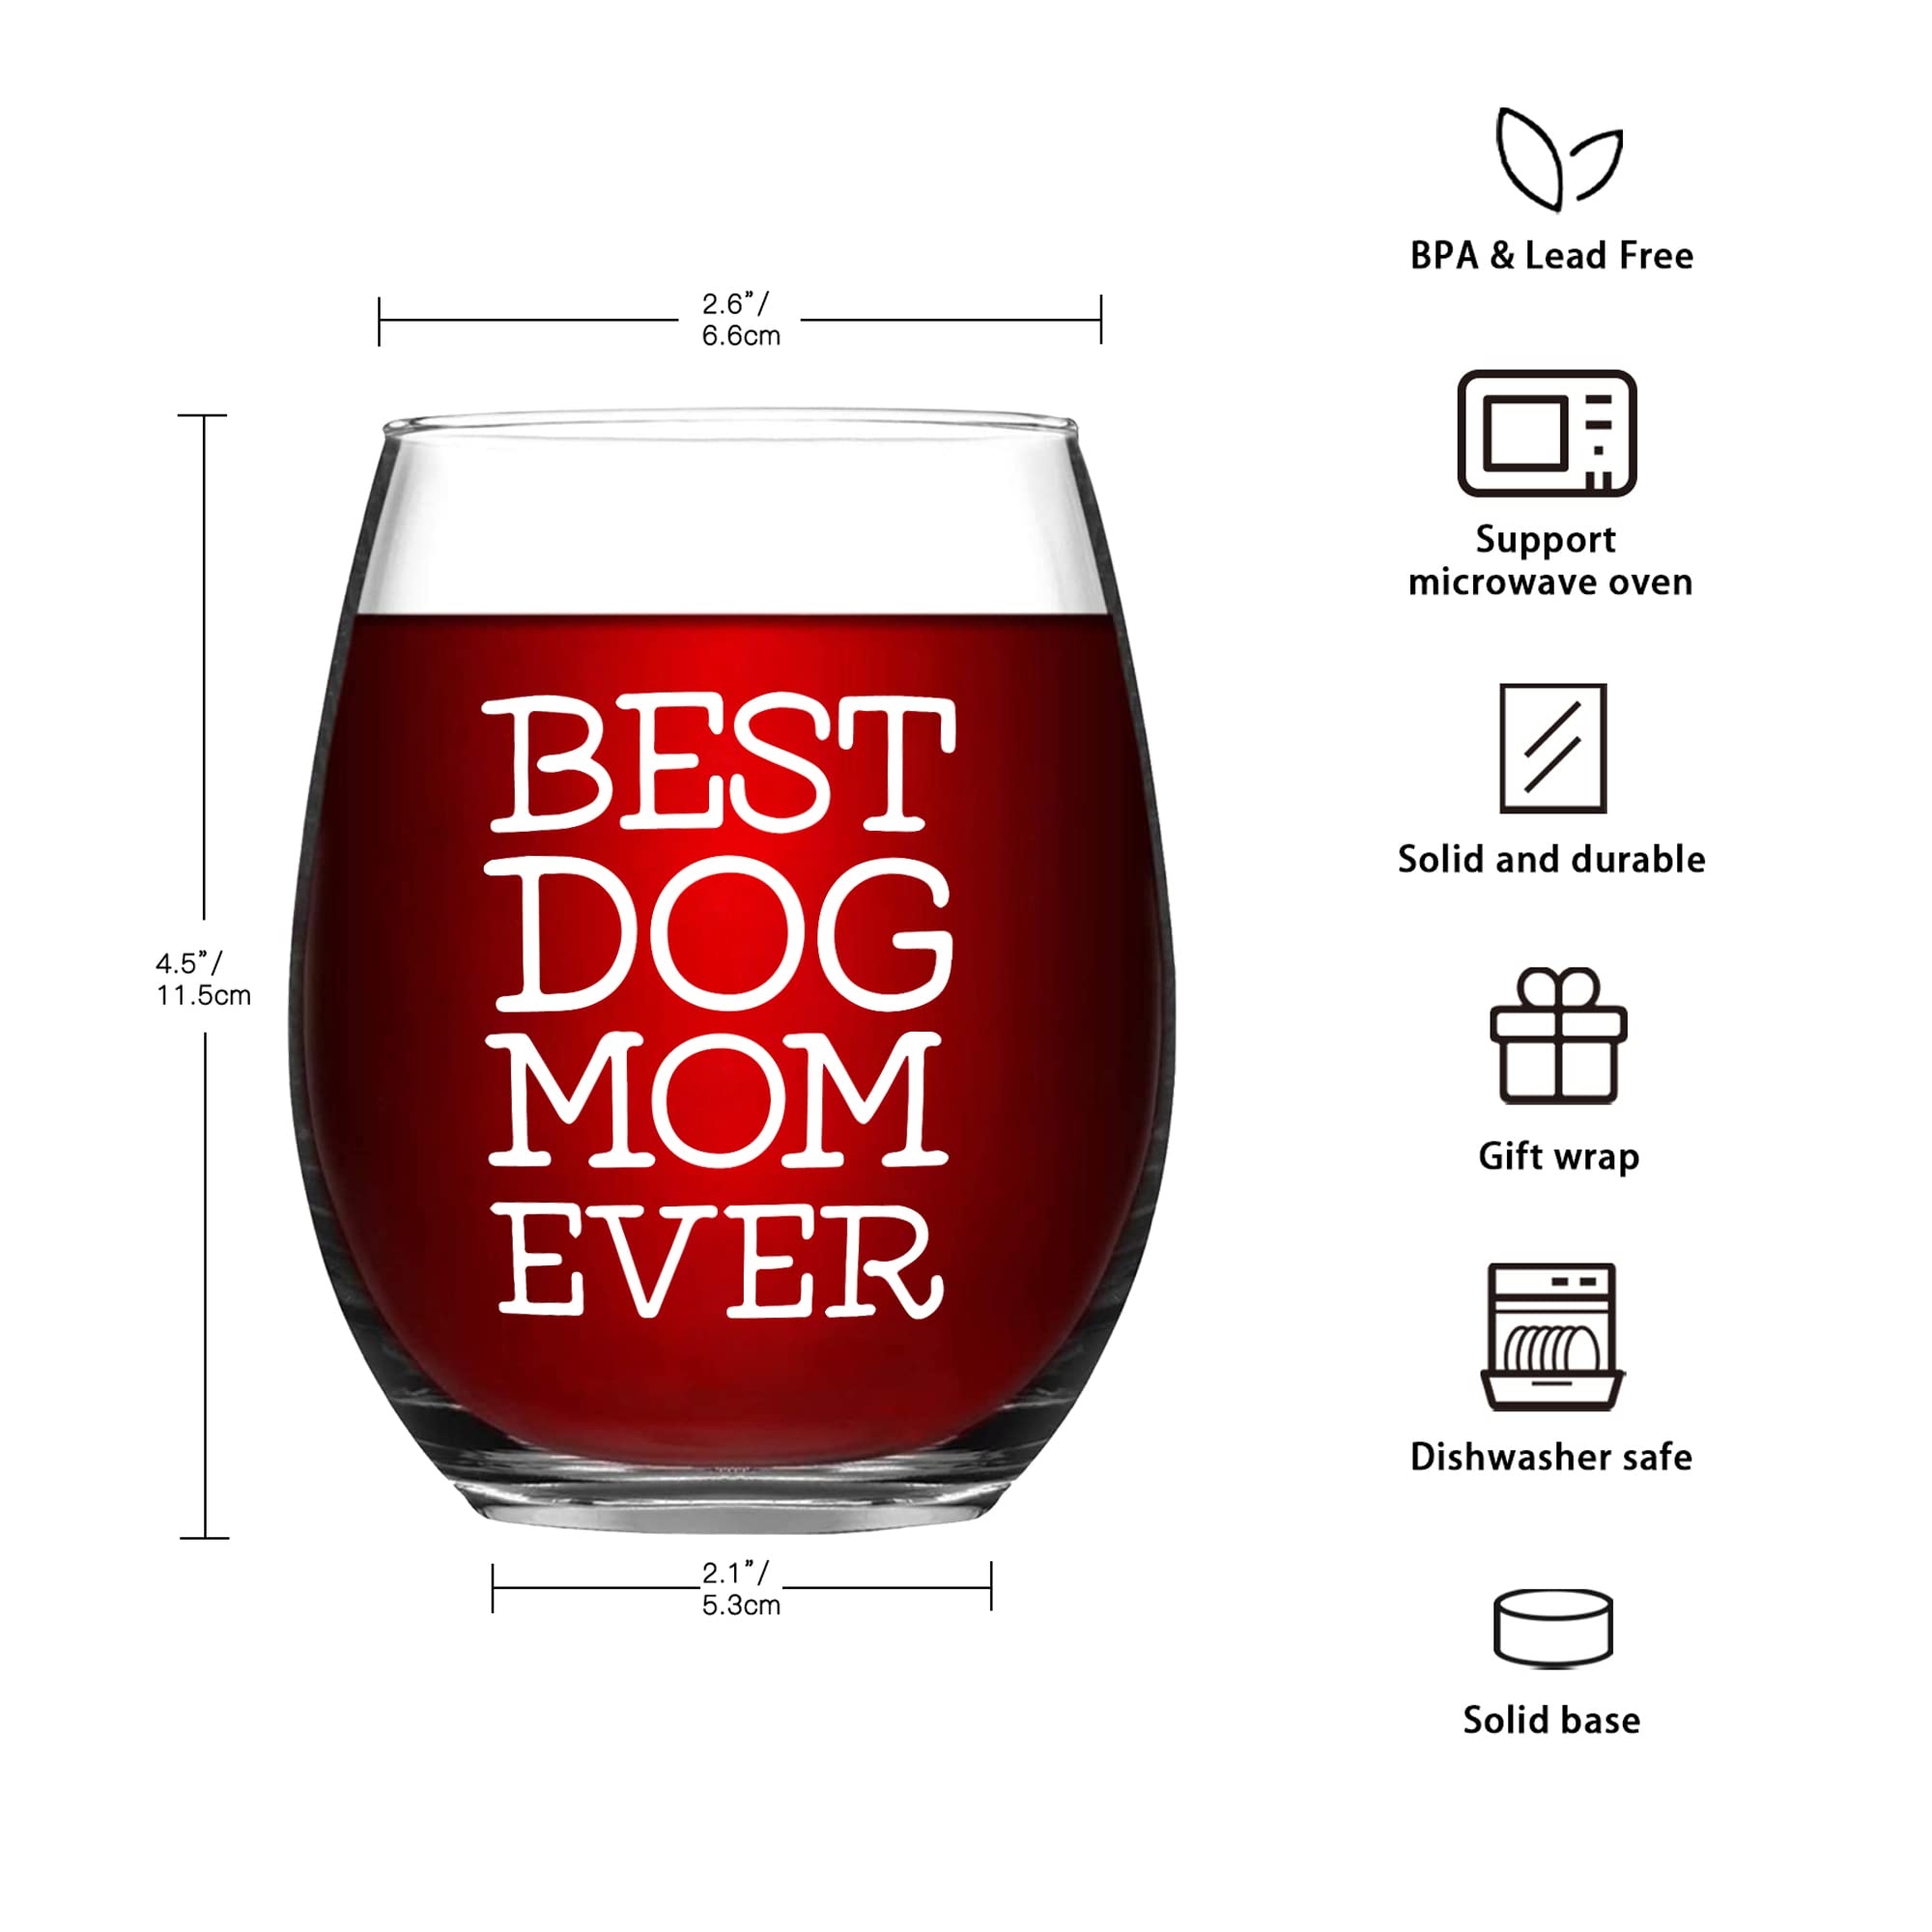 Best Dog Mom Ever Wine Glass Dog Mom Wine Glass Dog Wine Glass Dog Gifts for Dog Mom Mother Dog Lovers Birthday Mothers Day Gifts for Dog Mom from Daughter Son with Gift Box Thicken 15 Ounce White